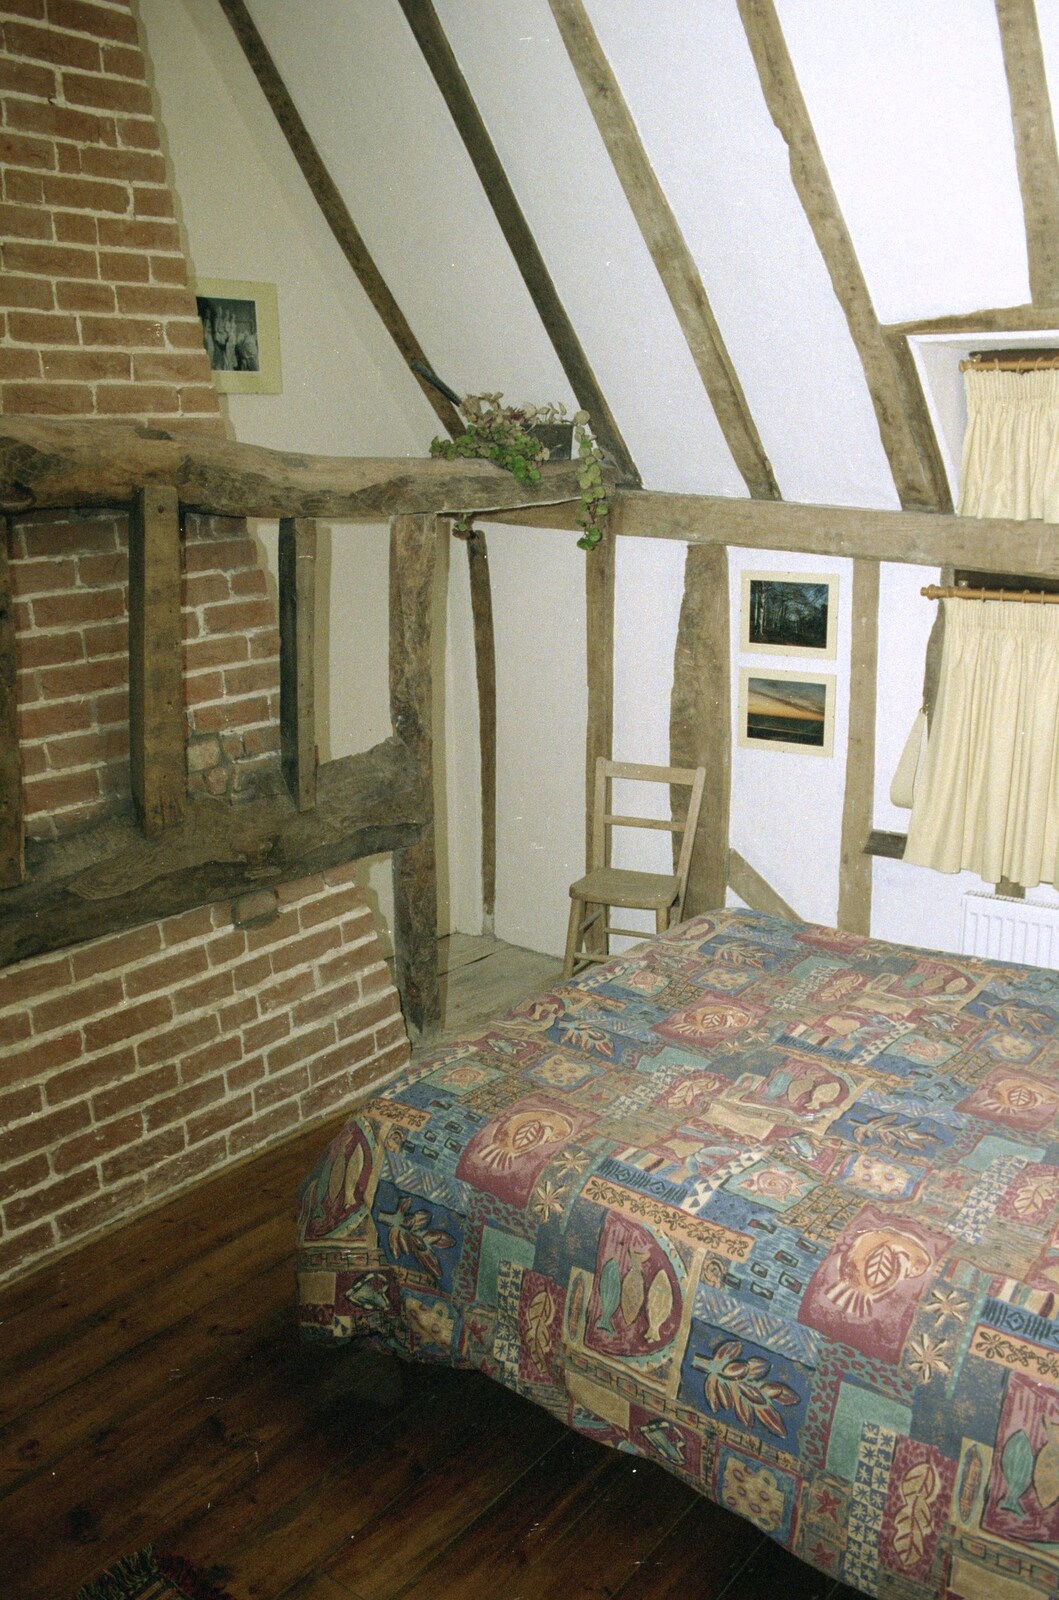 A view of the newly-finished bedroom from The CISU Internet Team, Bedroom Building and Ferries, Suffolk - 16th February 1996